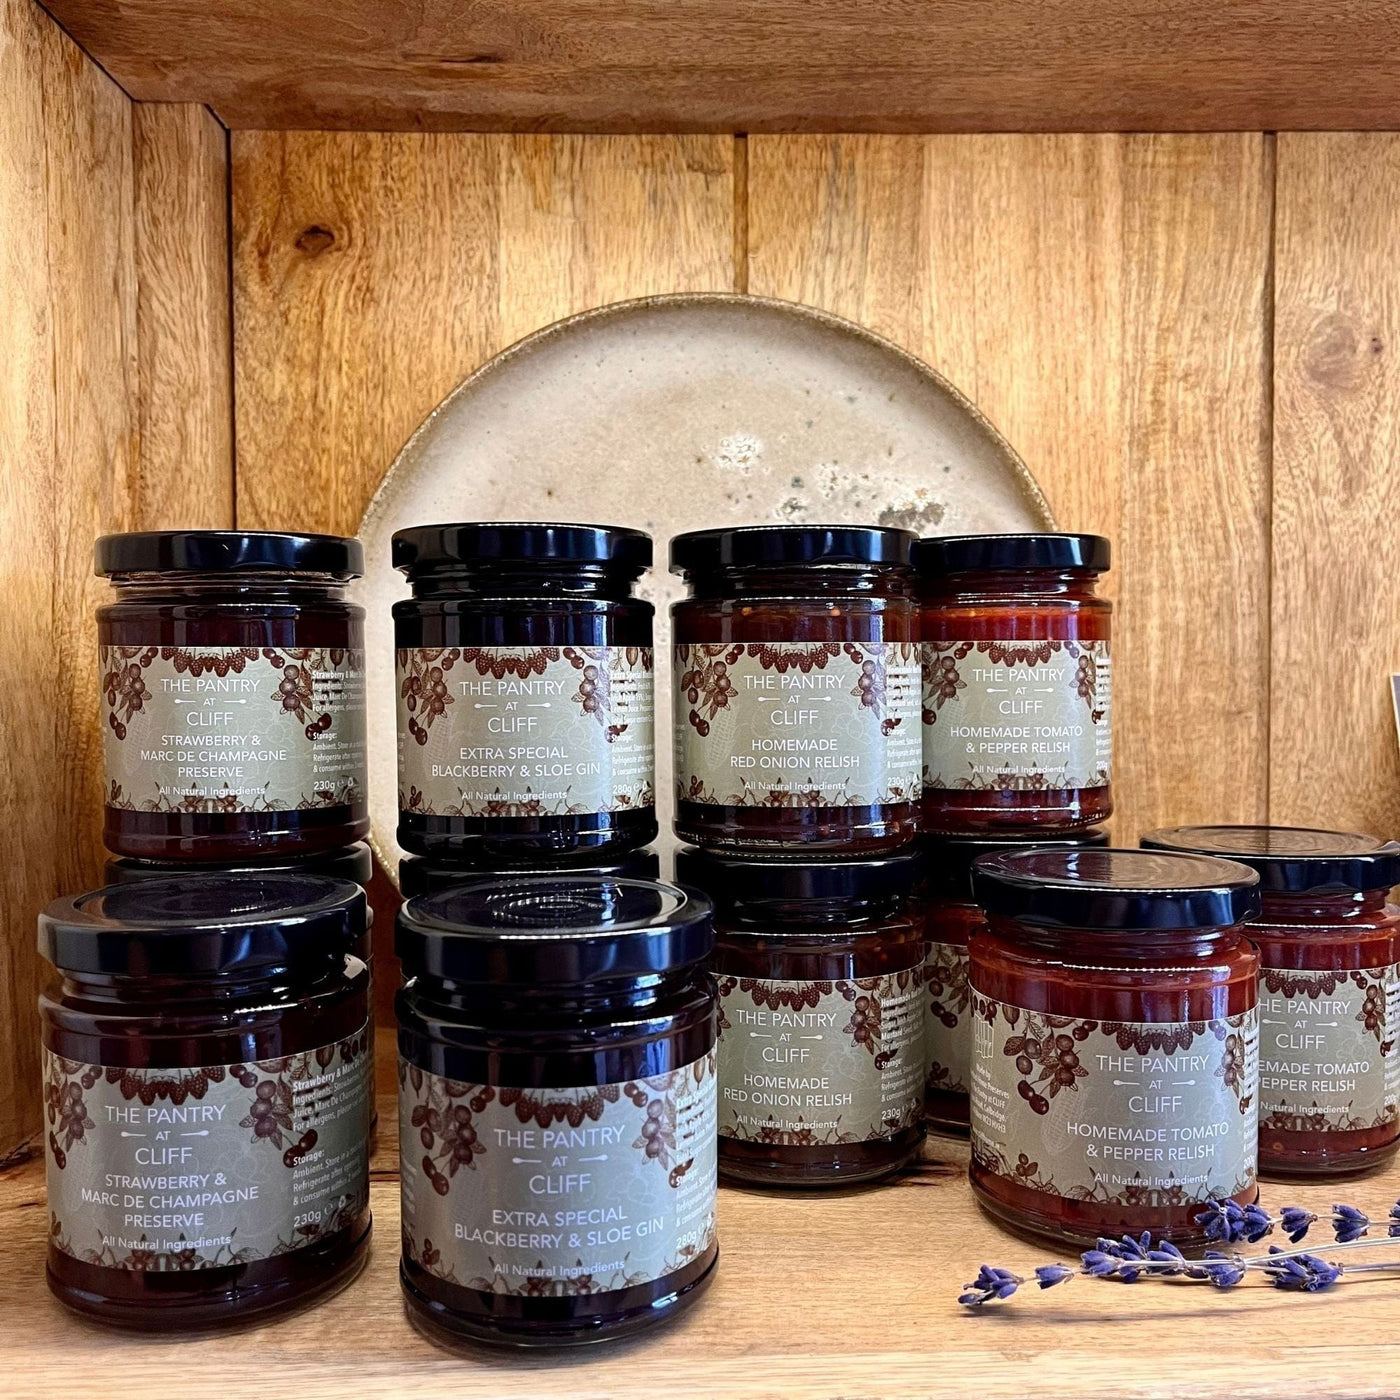 The Pantry at CLIFF Jams & Jellies Strawberry & Marc De Champagne Preserve